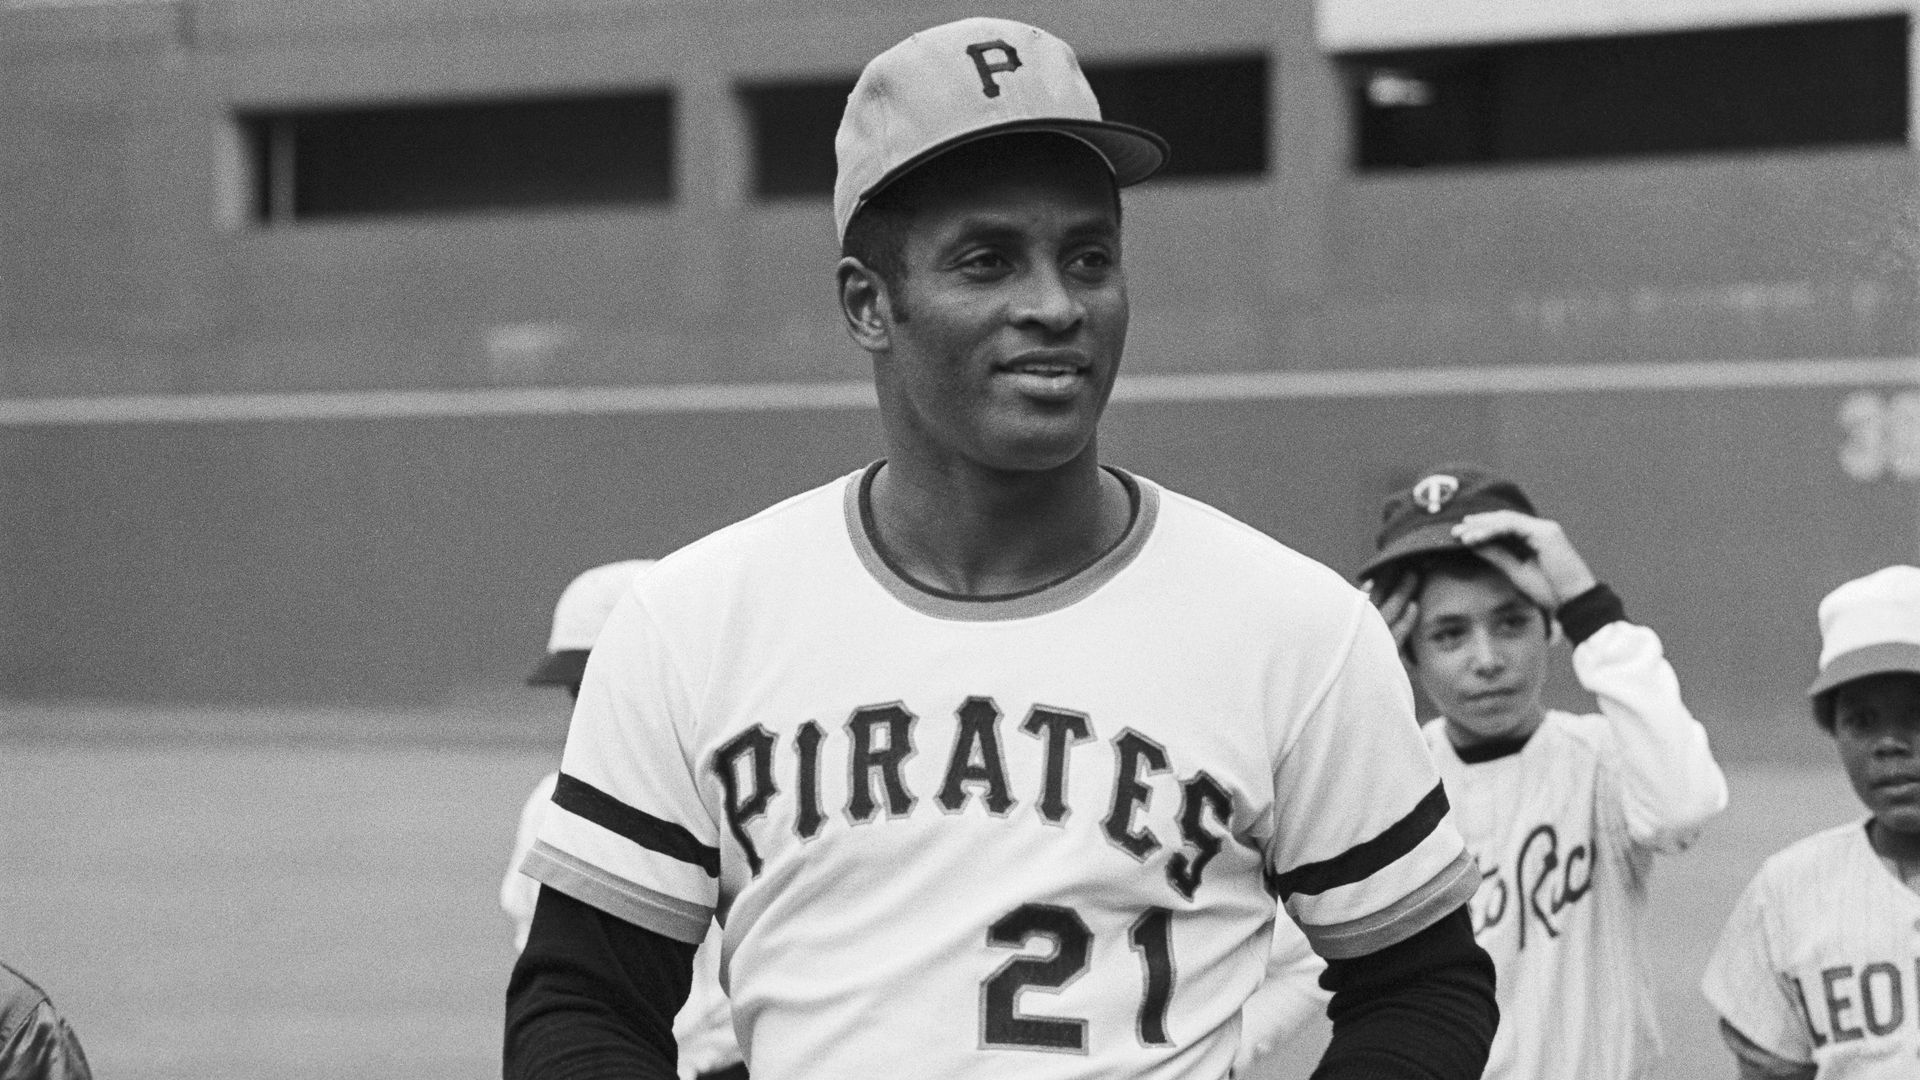  Roberto Clemente of the Pittsburgh Pirates before the opening game of the National League playoffs in October, 1971.